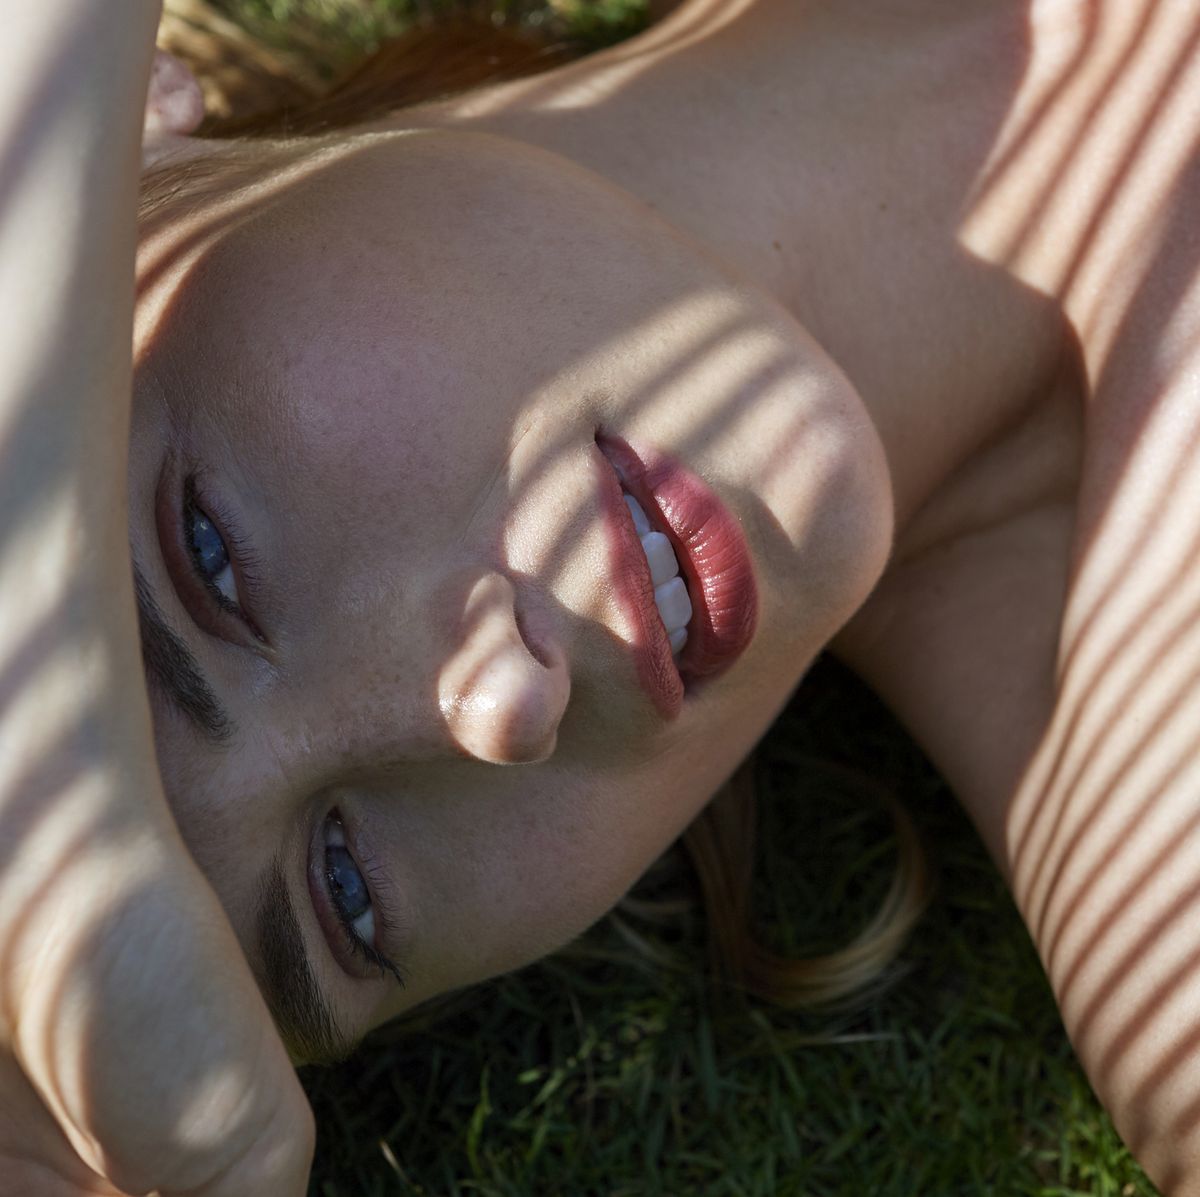 woman lying on grass with shadows cast on skin